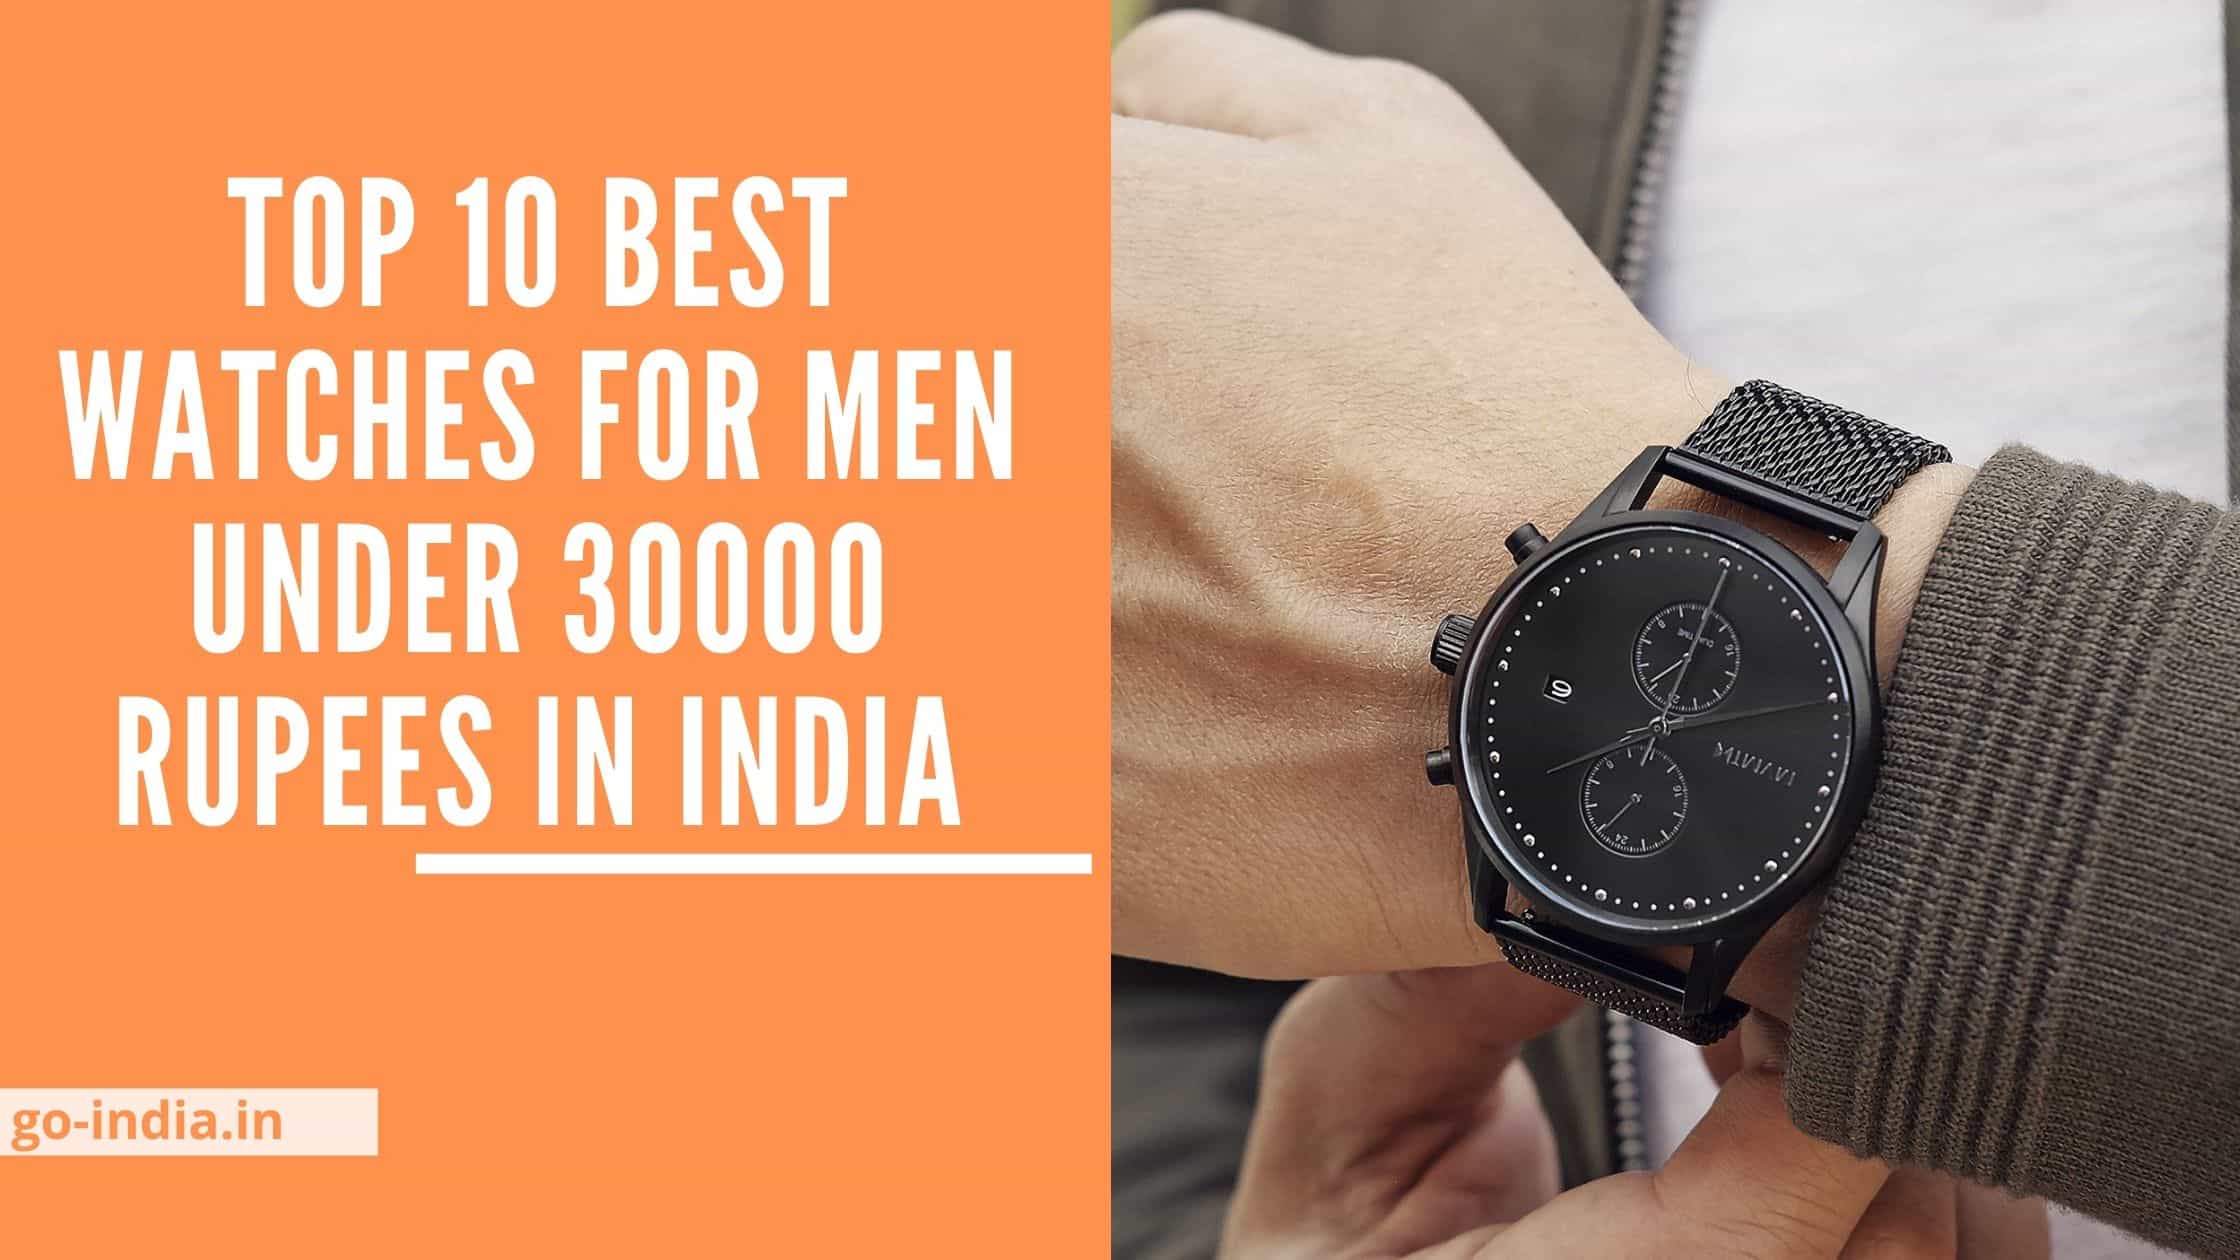 Top 10 Best Watches For Men Under 30000 Rupees in India